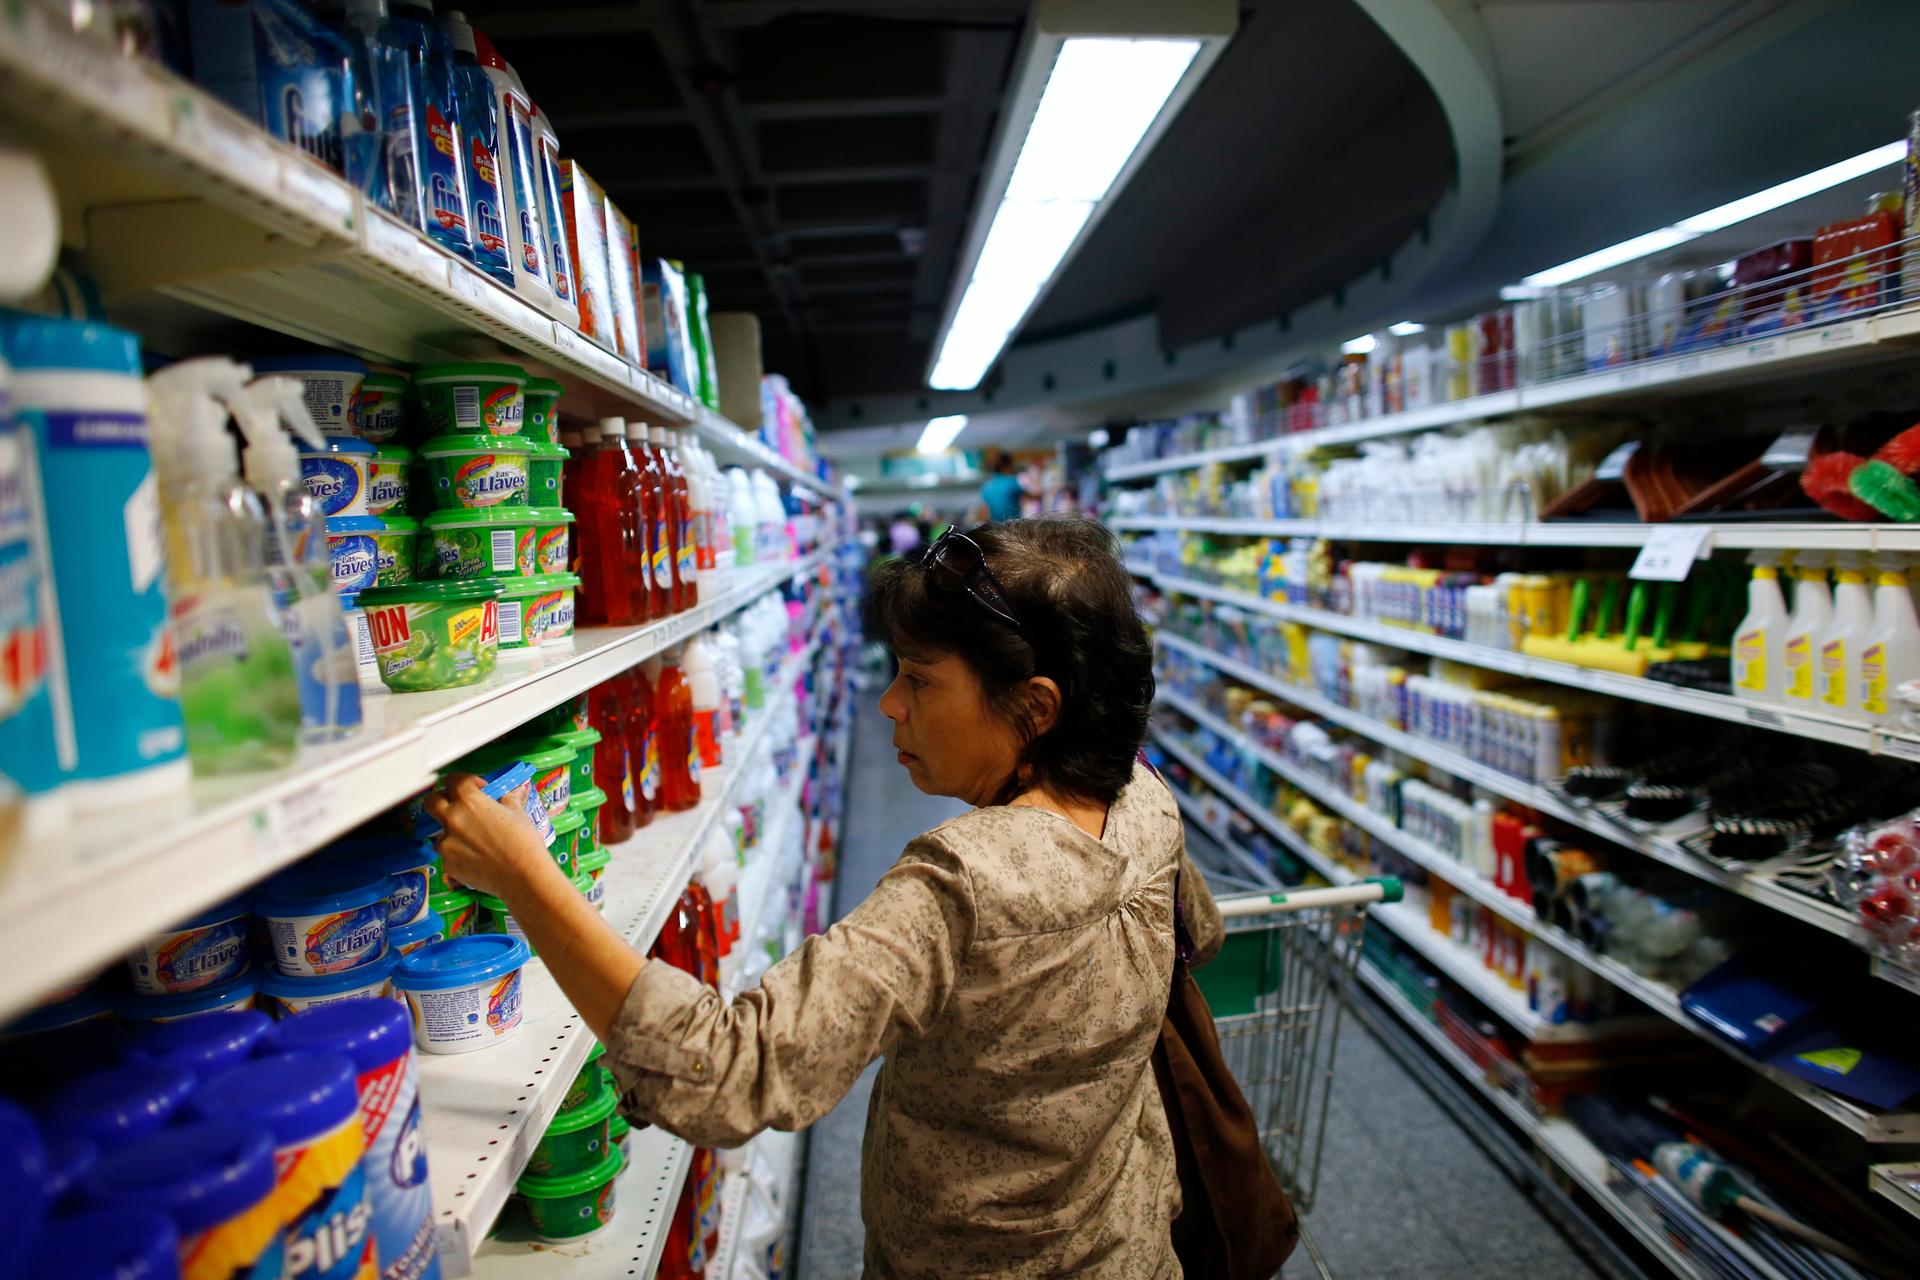 Supplies of food and other basic products have been patchy in recent months in Caracas, Venezuela. The situation has spawned jokes among Venezuelans, particularly over the lack of toilet paper. 